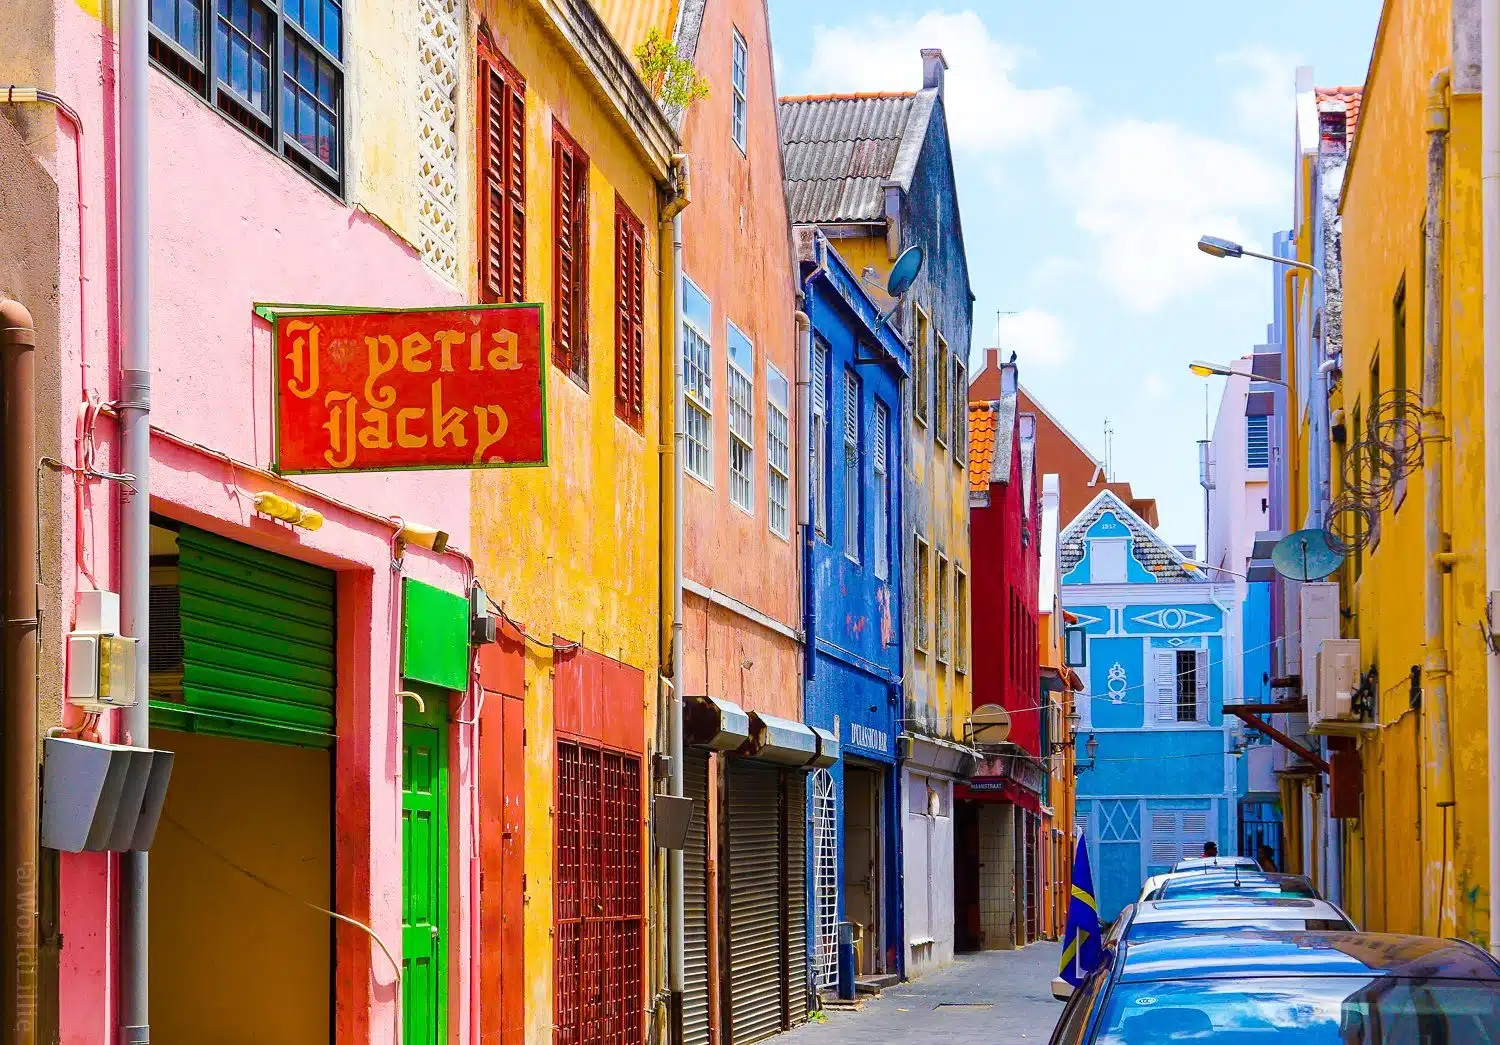 Willemstad, Curaçao is a glorious rainbow of color.